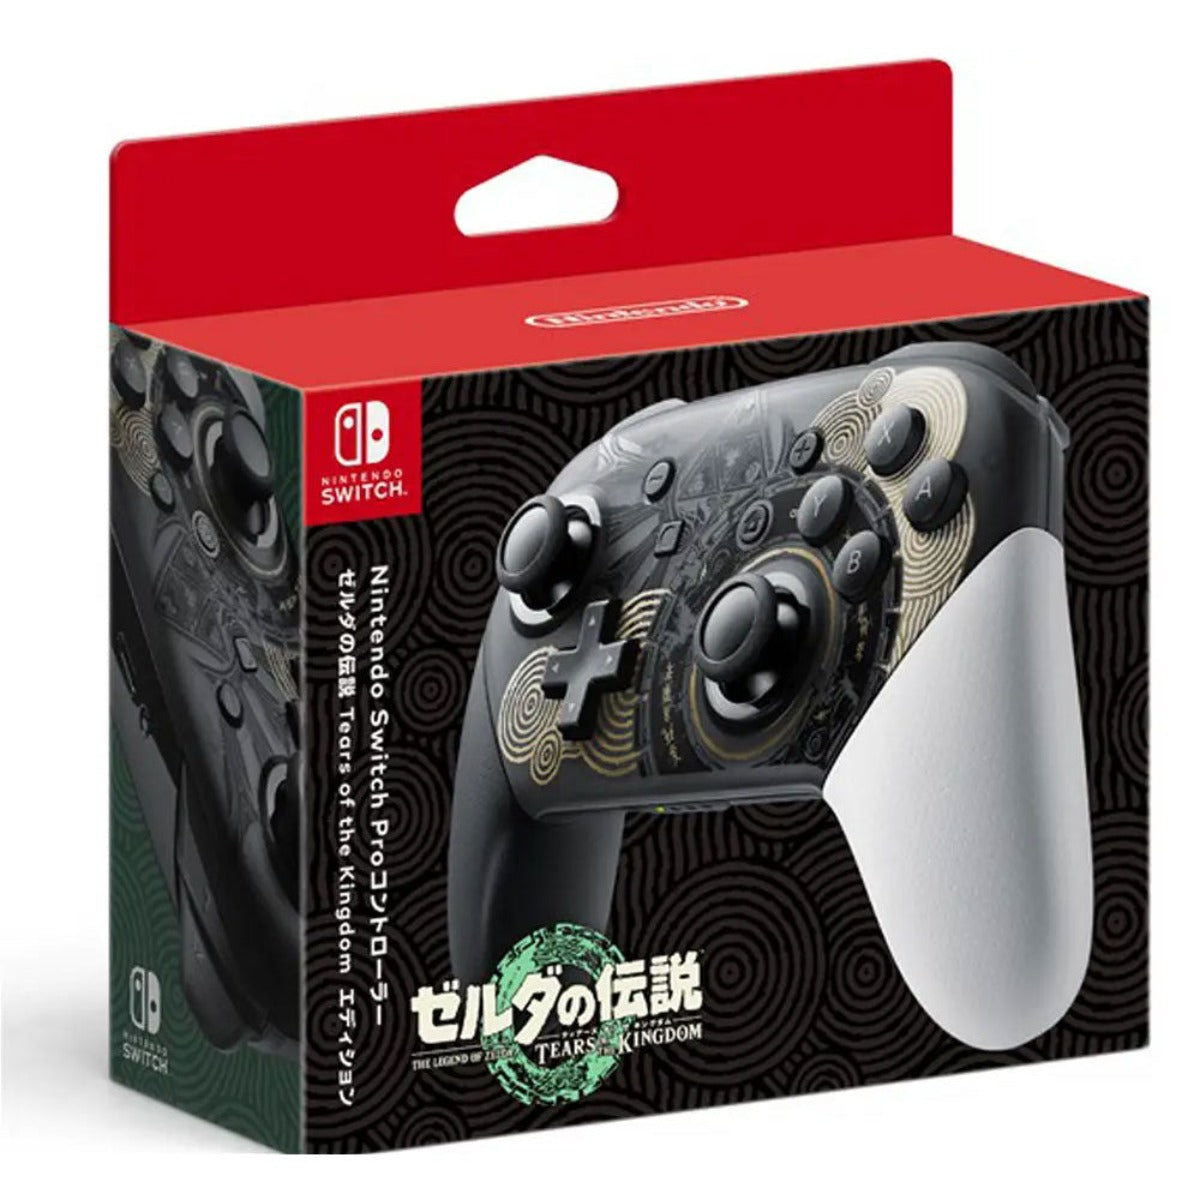 Nintendo Switch Official Pro Controller [The Legend of Zelda: Tears of the Kingdom Edition]